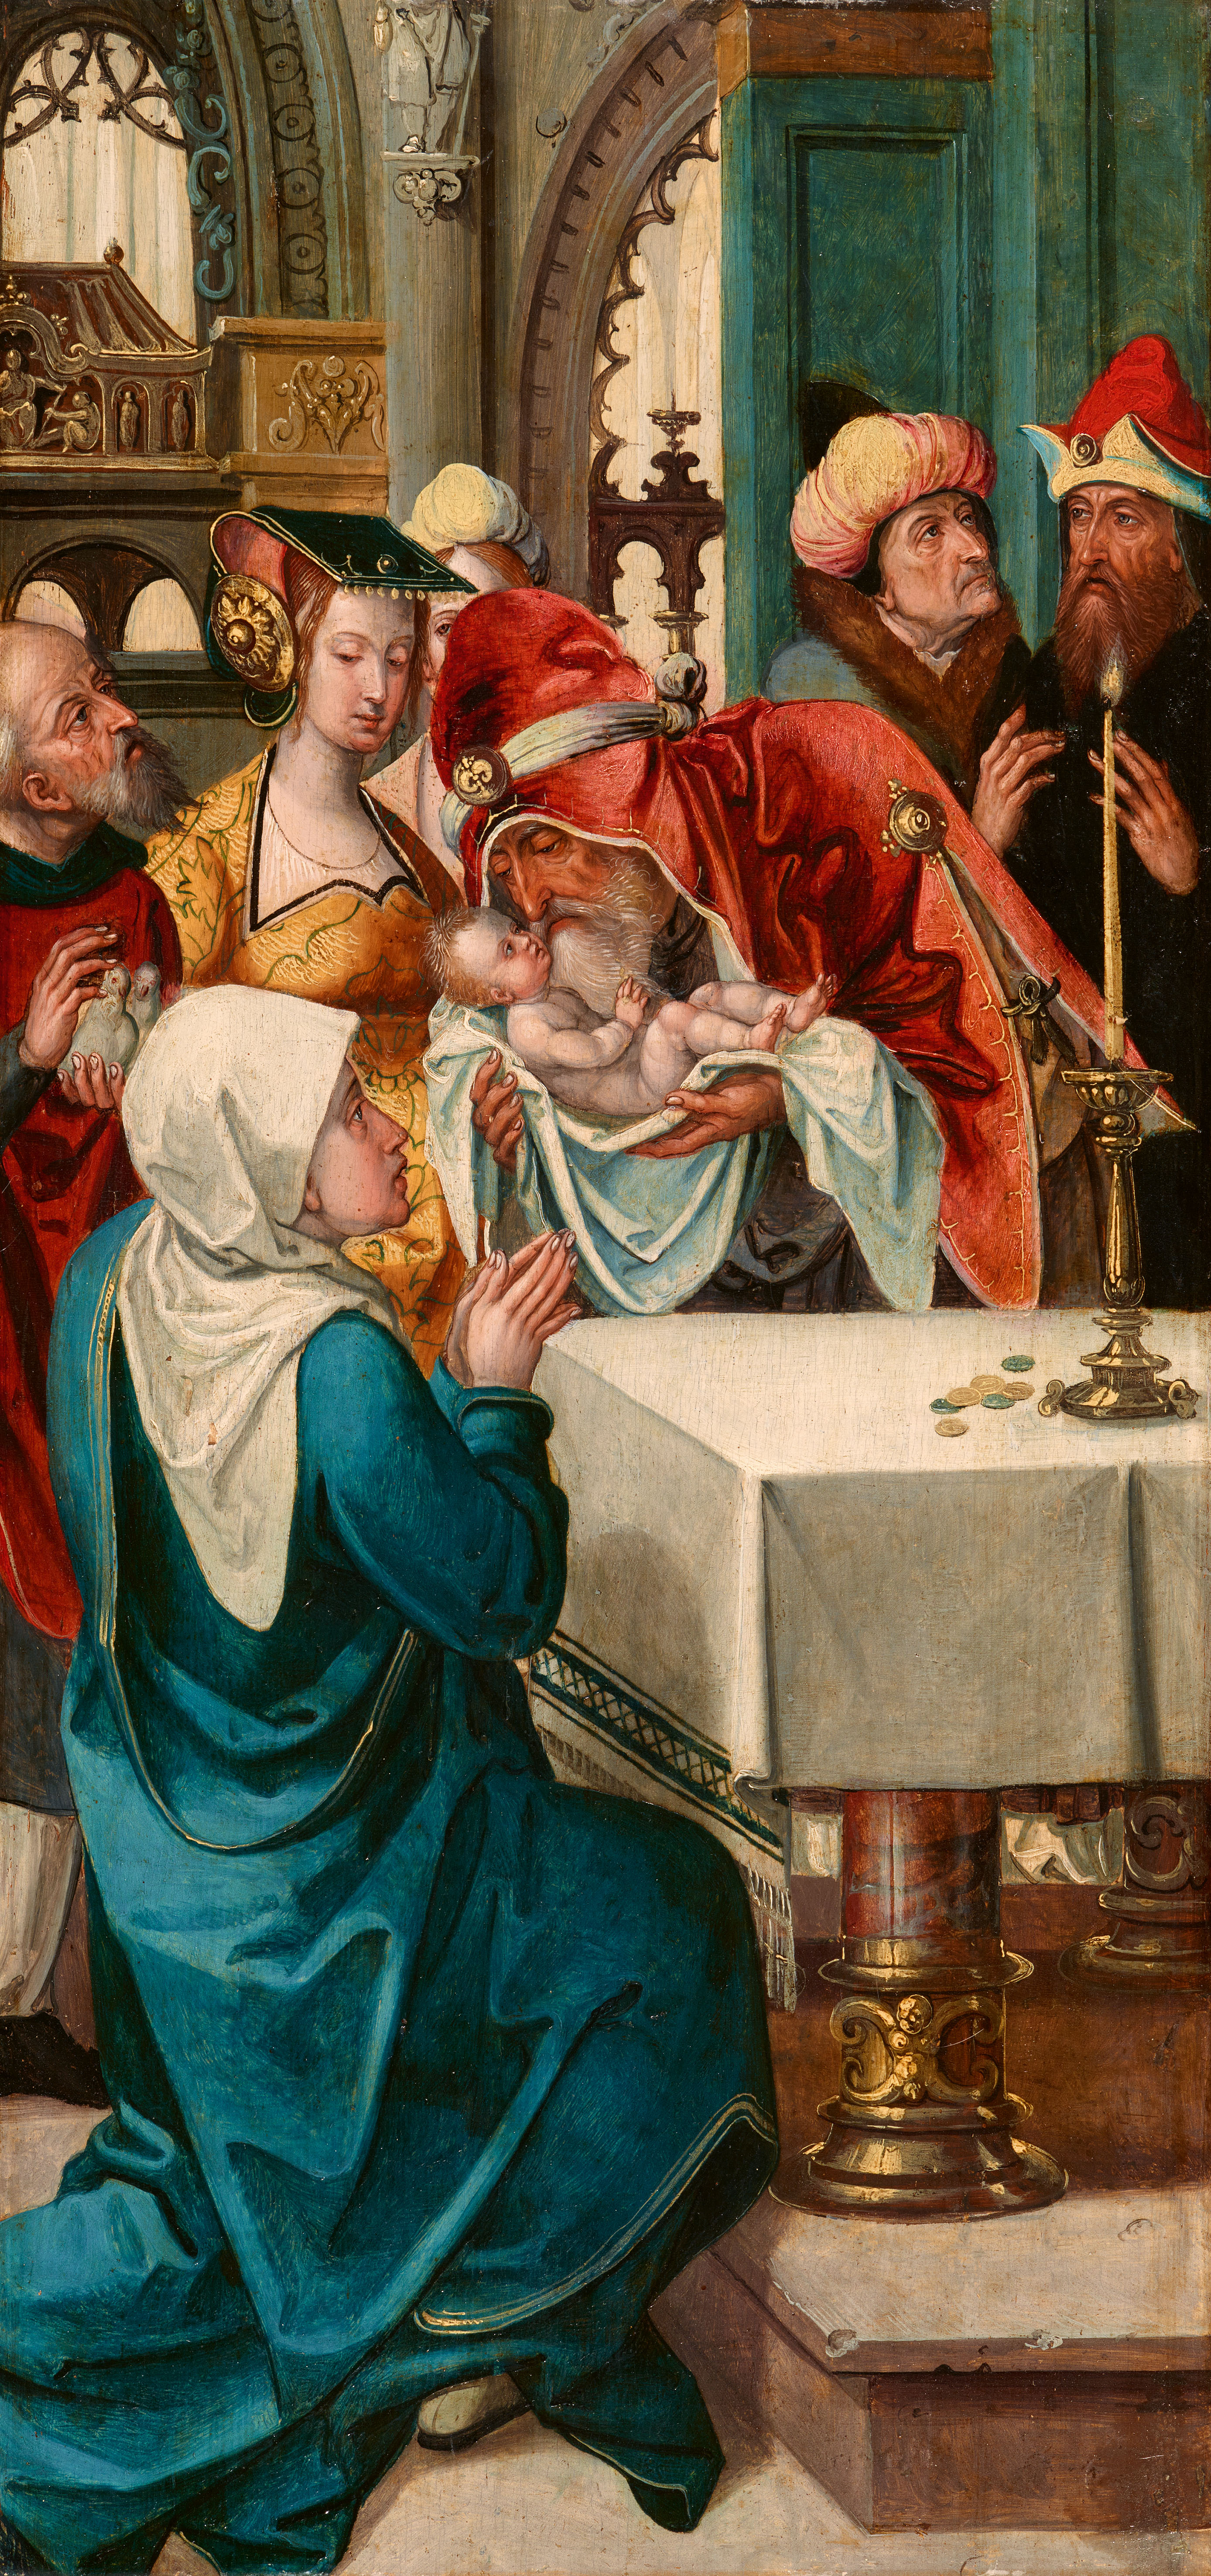 Cornelis Engebrechtsz, attributed to - The Presentation in the Temple - image-1